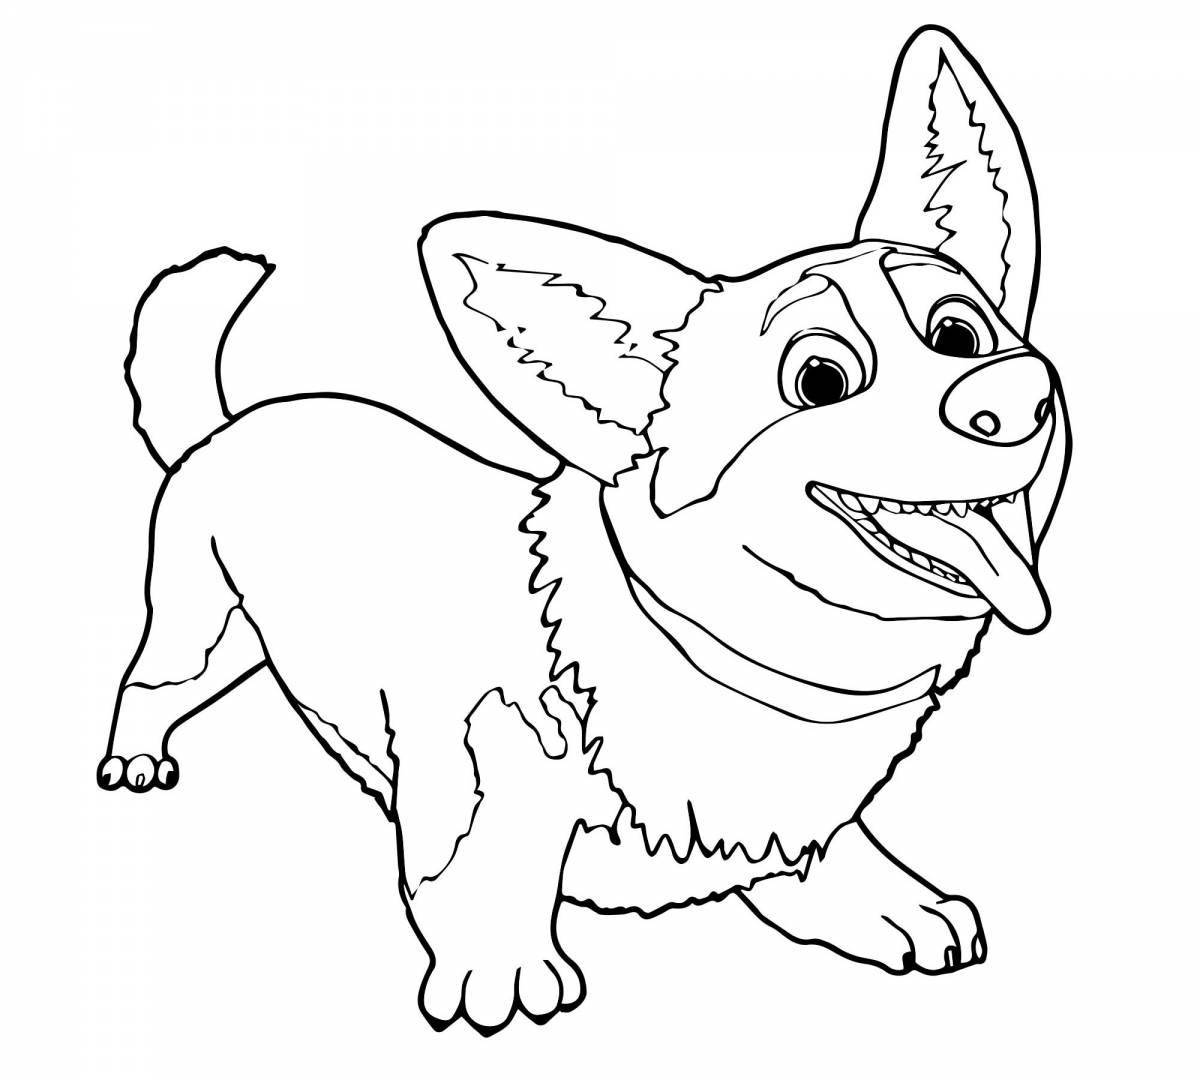 Cute corgi coloring pages for kids